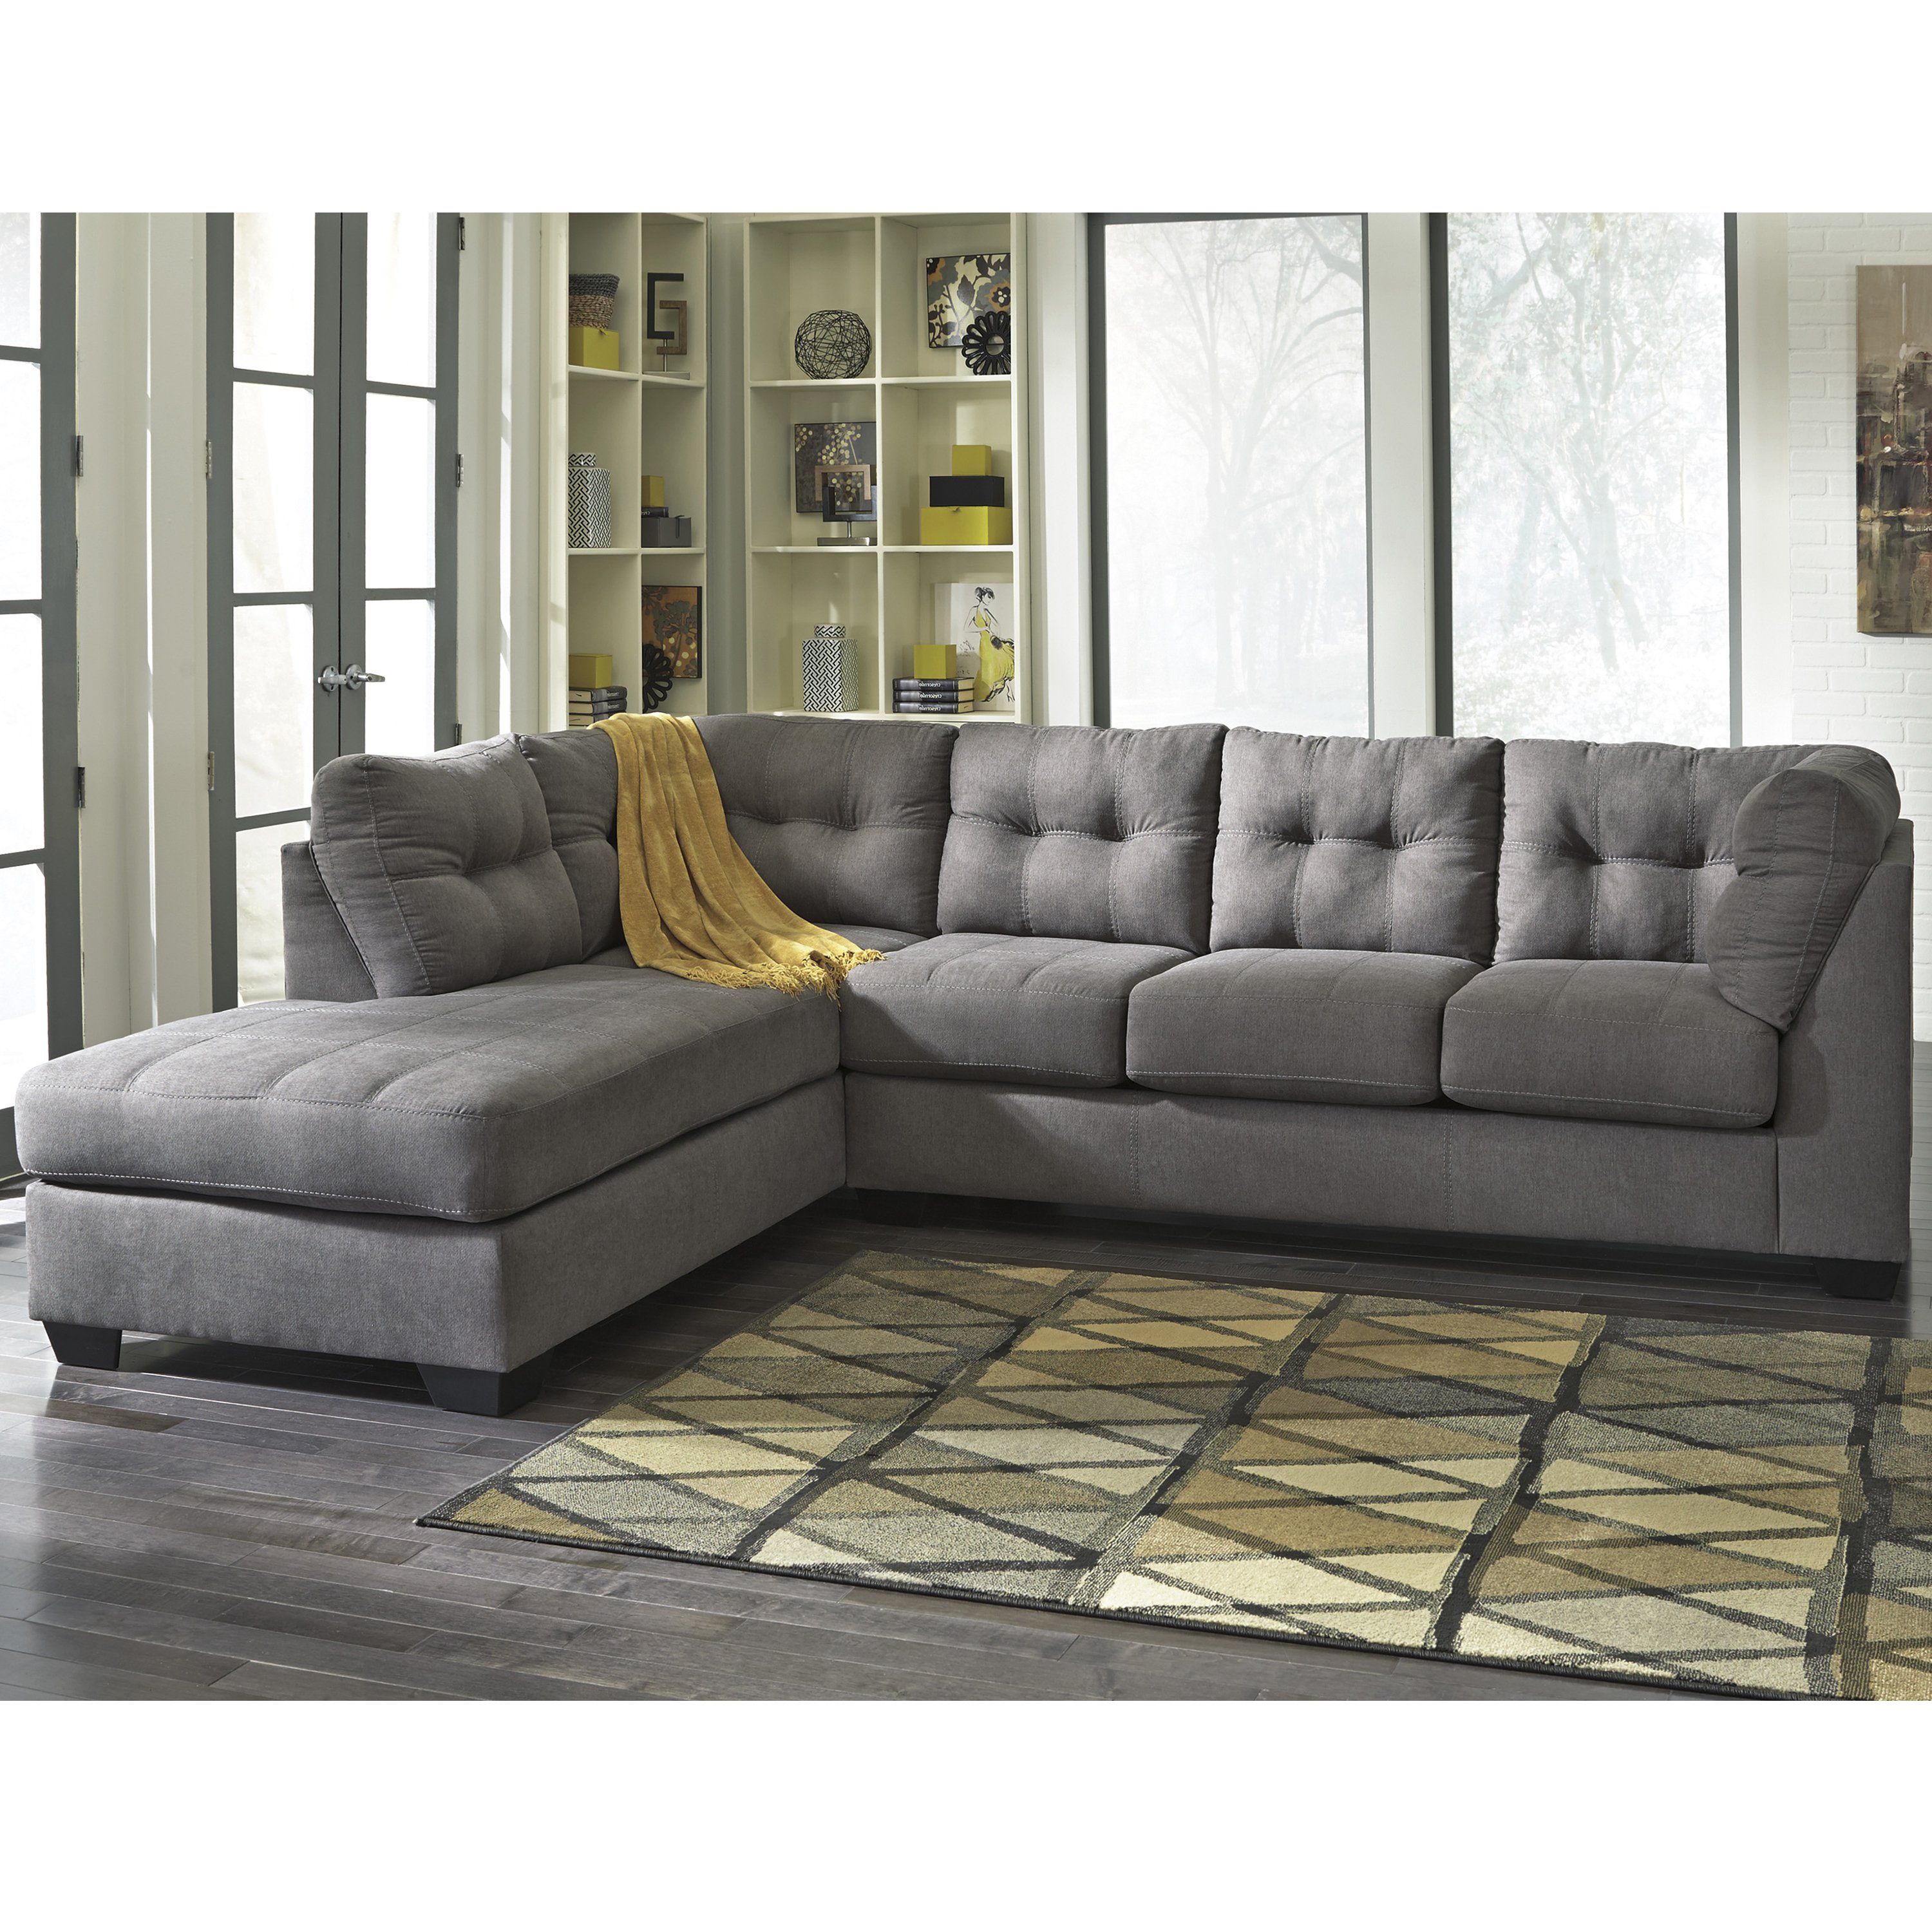 Shop Clay Alder Home Wells Microfiber Sectional With Left Side With Regard To Alder Grande Ii Sofa Chairs (View 11 of 25)